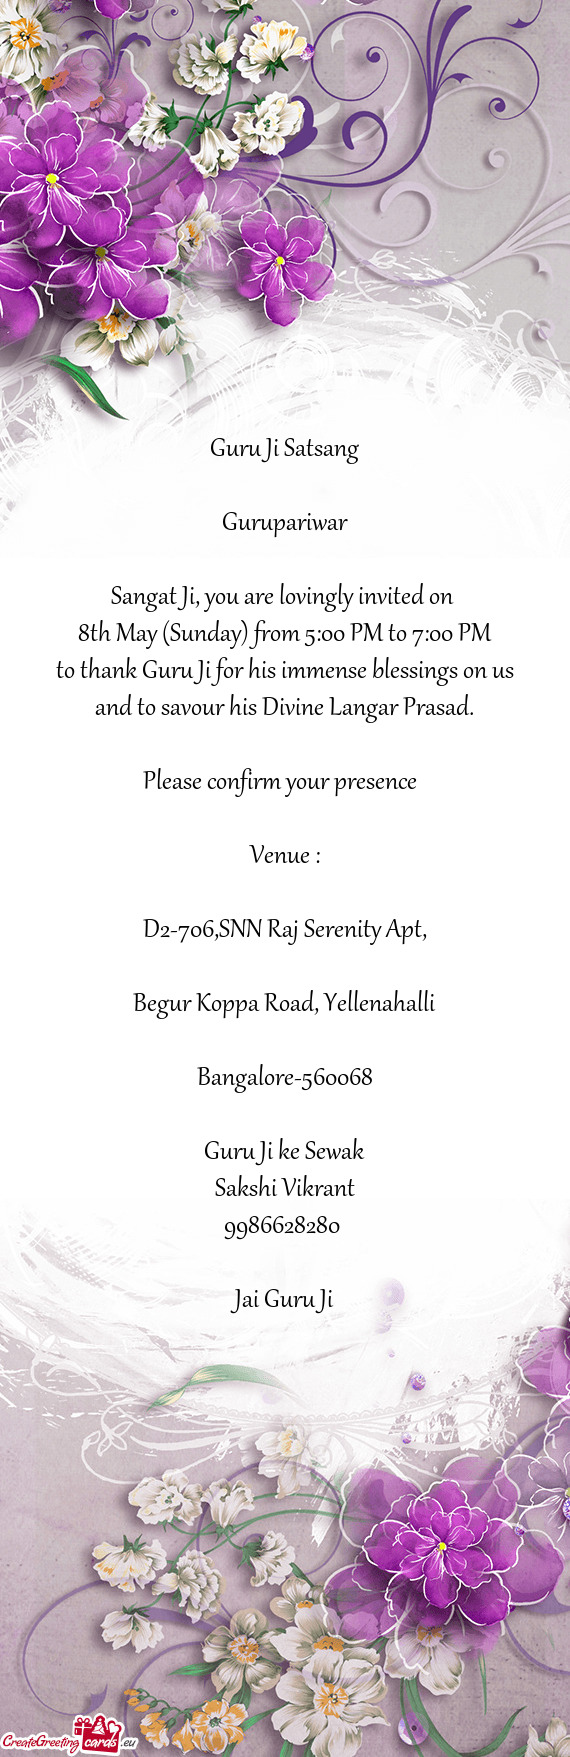 8th May (Sunday) from 5:00 PM to 7:00 PM